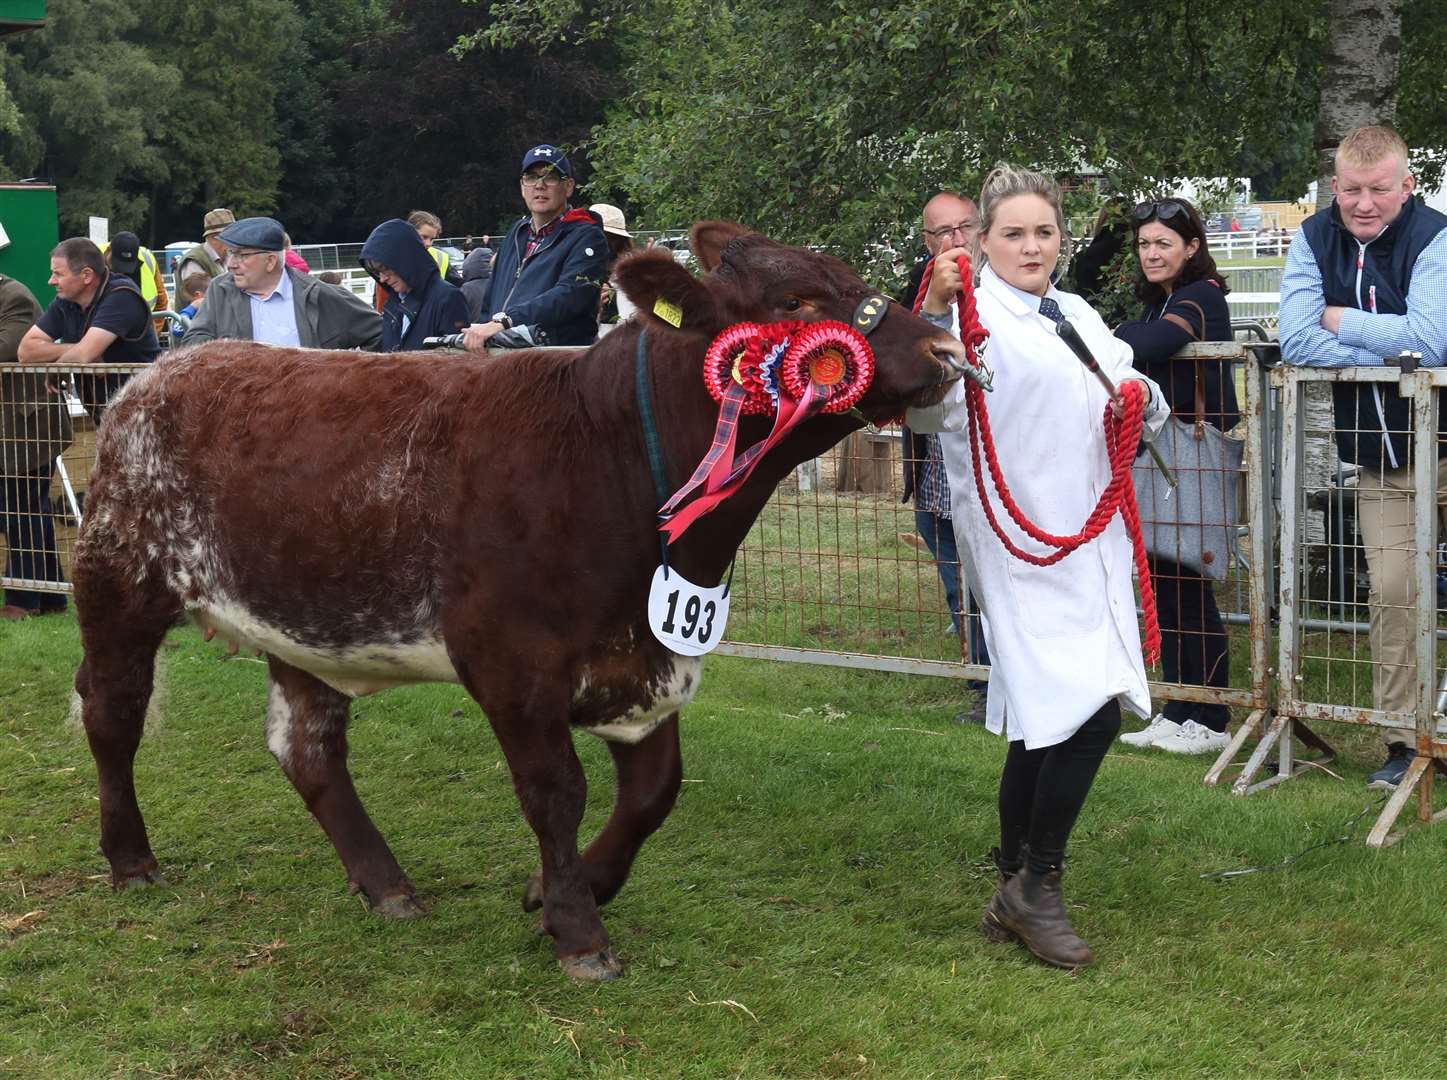 No 193 Dunsyre Gigha 42nd, shorthorn champion. Picture: Davi dPorter